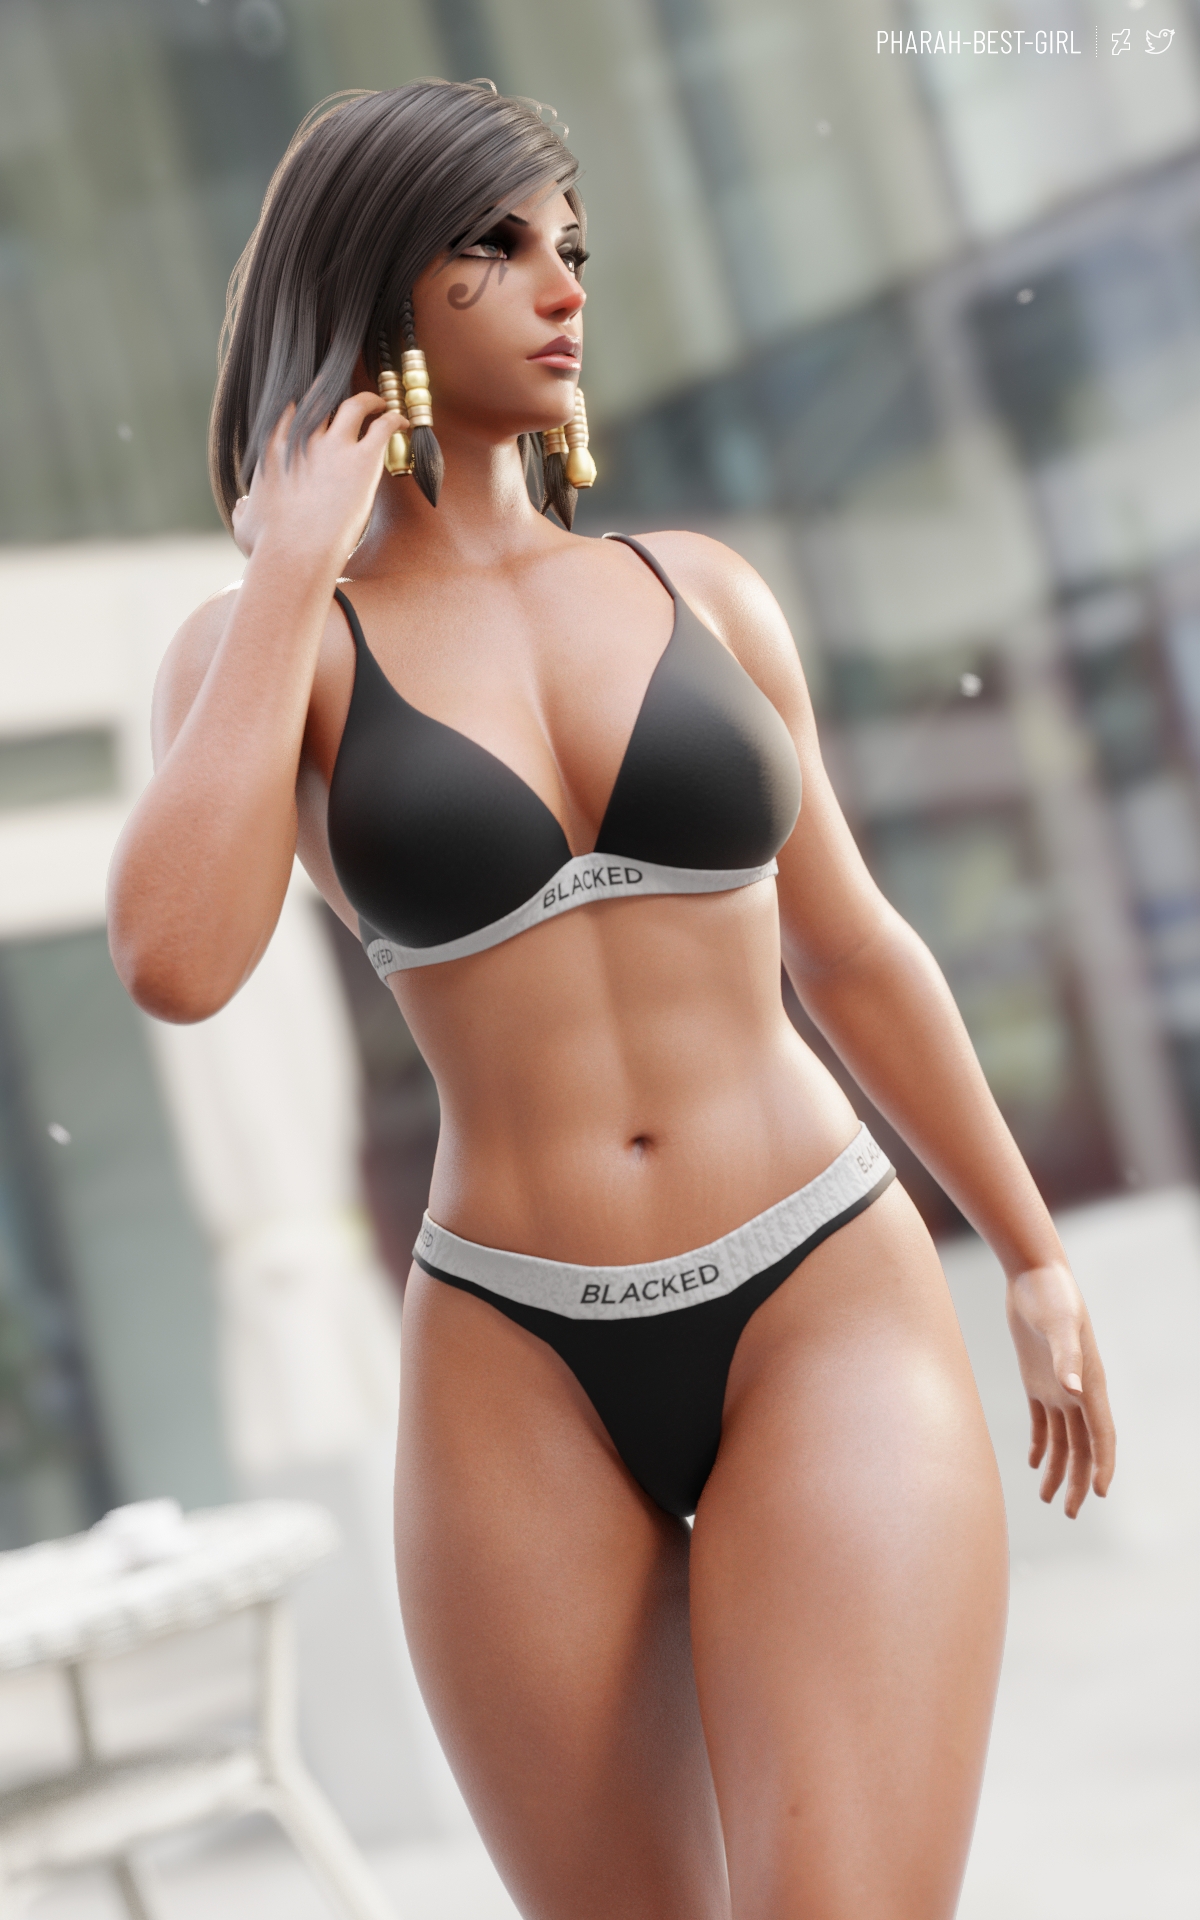 Pinup 121 Pharah Pharah (overwatch) Overwatch Muscular Girl Muscles Muscular Sporty Sport Tanlines Pubic Hair 9